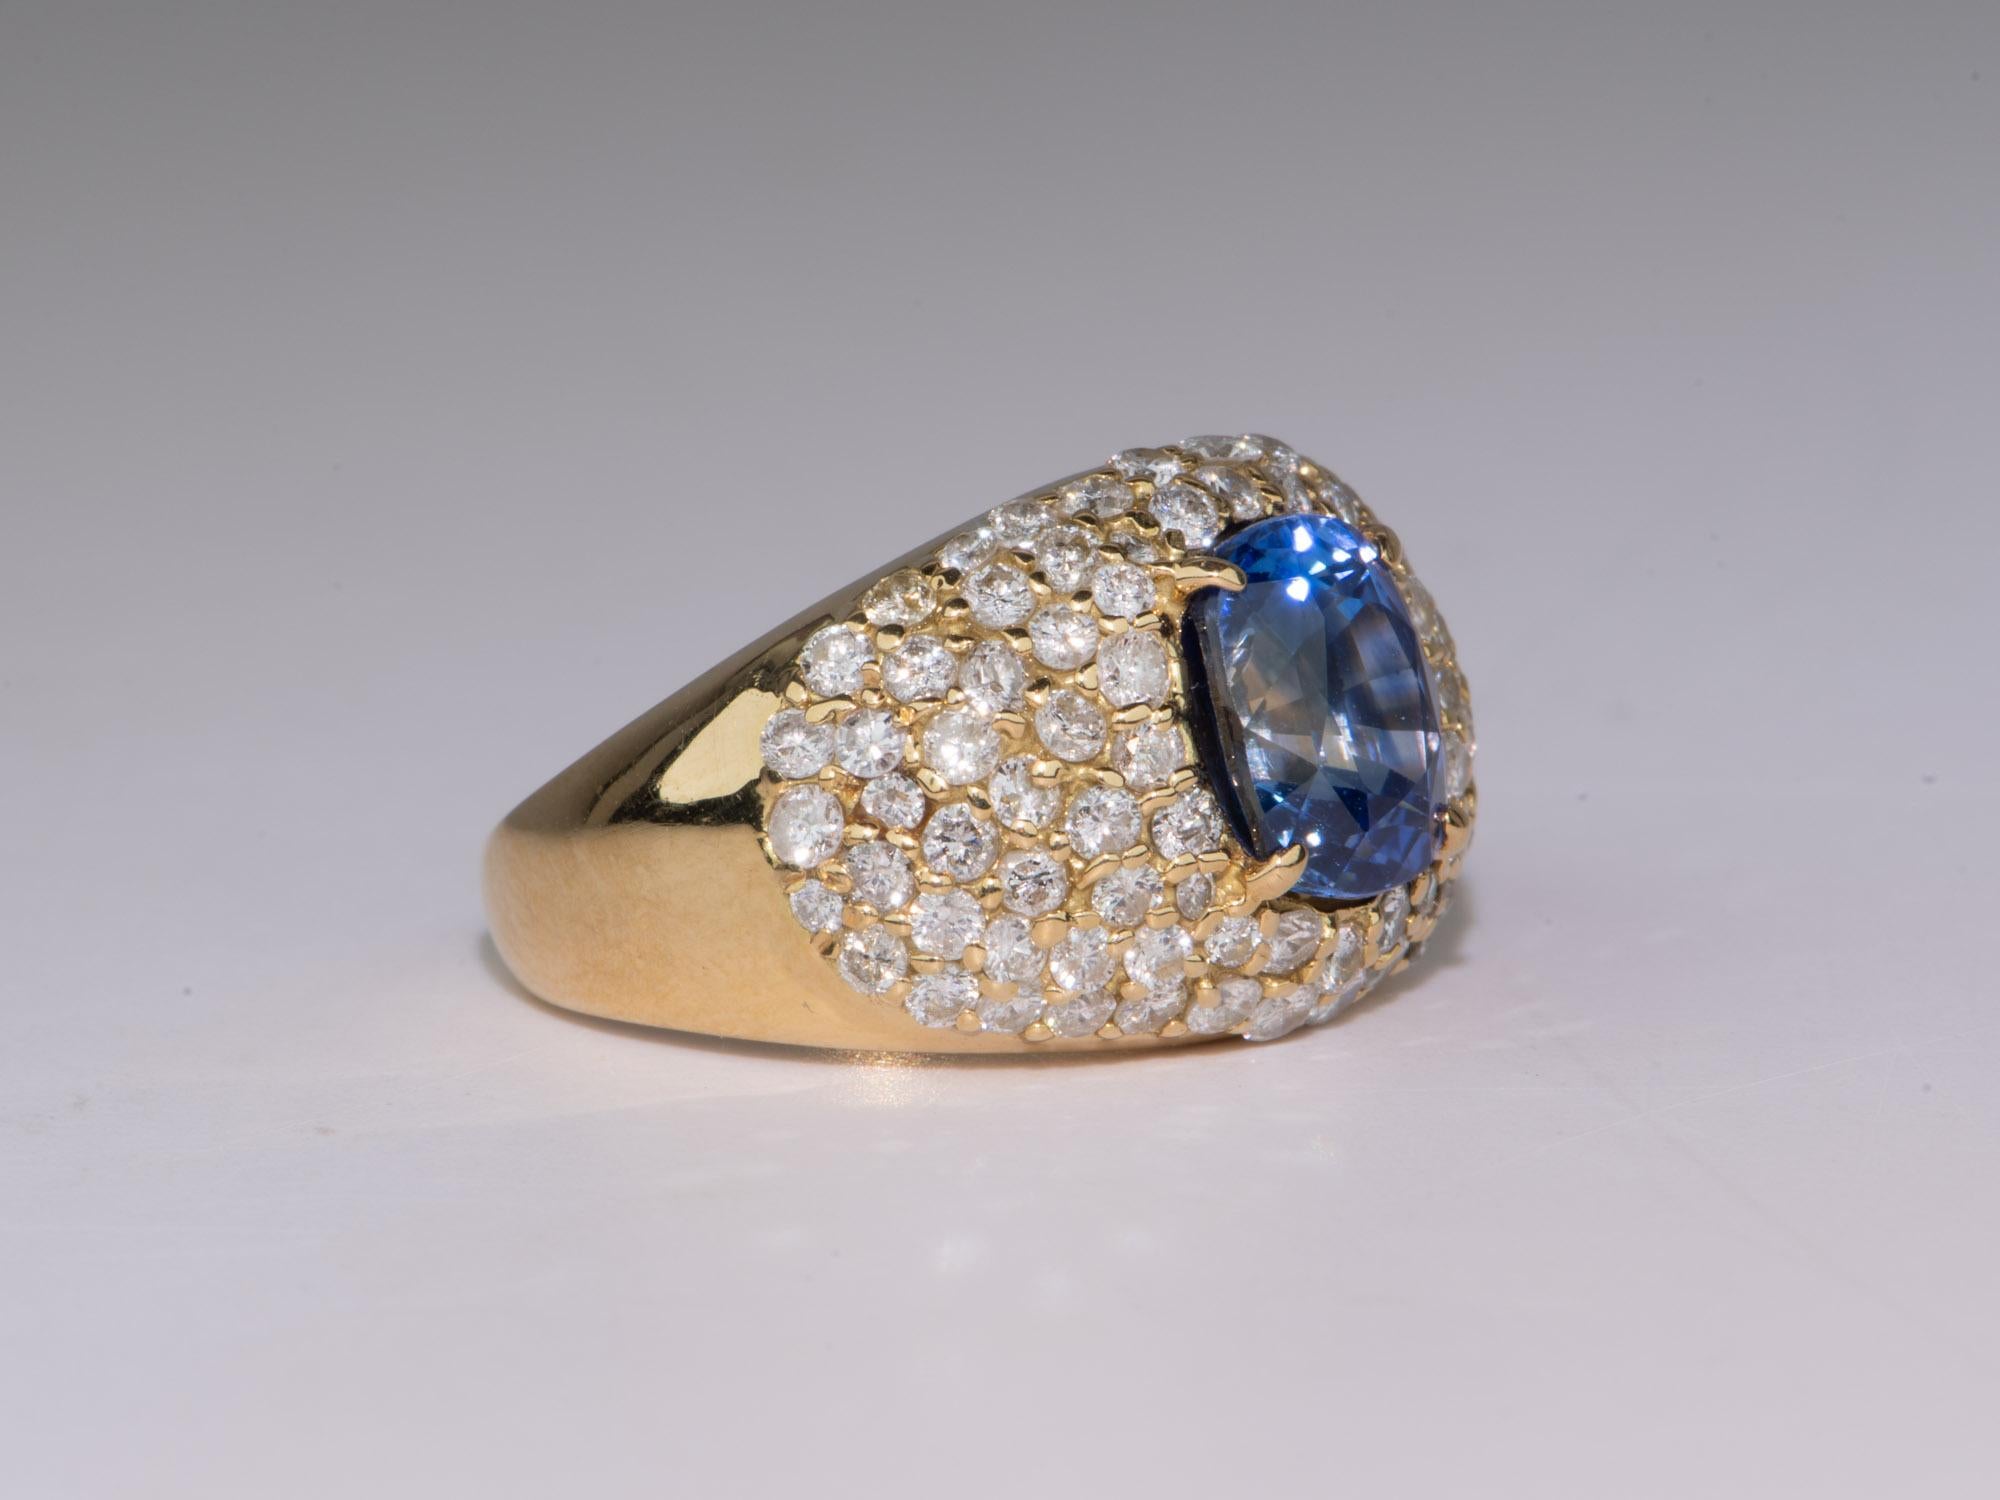 Uncut 3.47ct Natural Unheated Sapphire Wide Band Ring with Diamond Pave 18K Gold V1114 For Sale